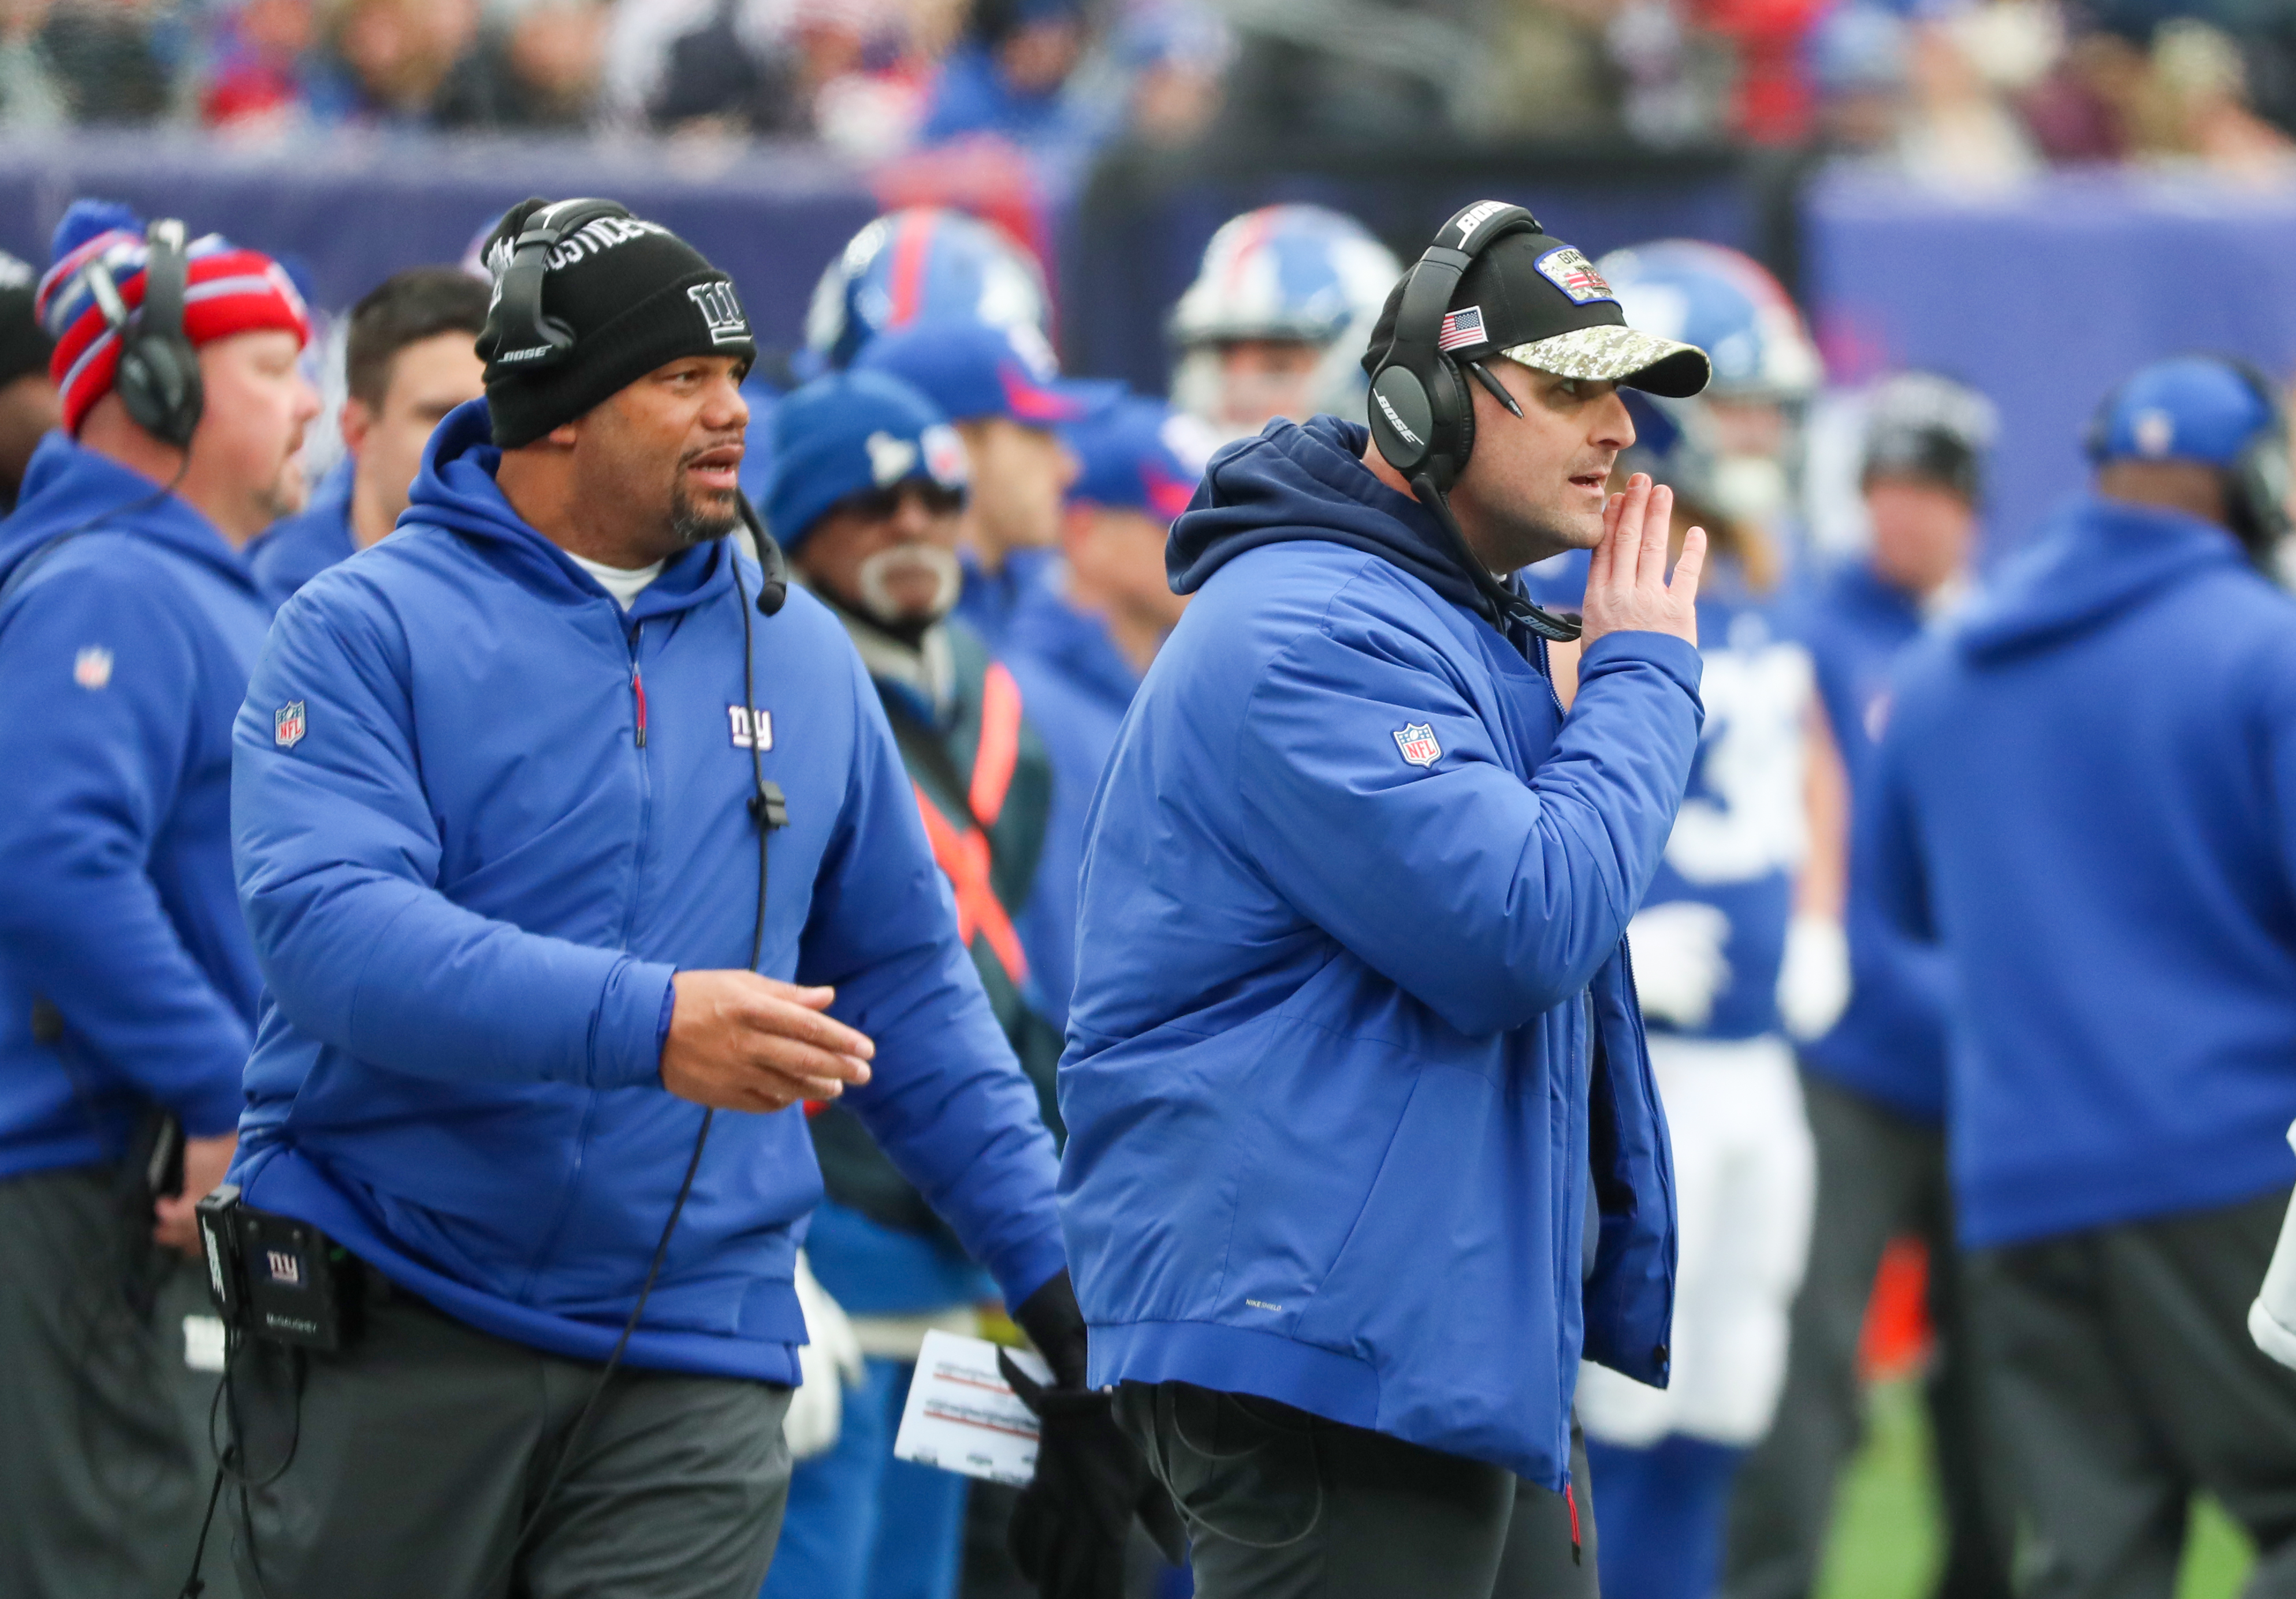 New York Giants head coach Joe Judge on the sideline during the second quarter against the Washington Football Team on Sunday, Jan. 9, 2022 in East Rutherford, N.J.